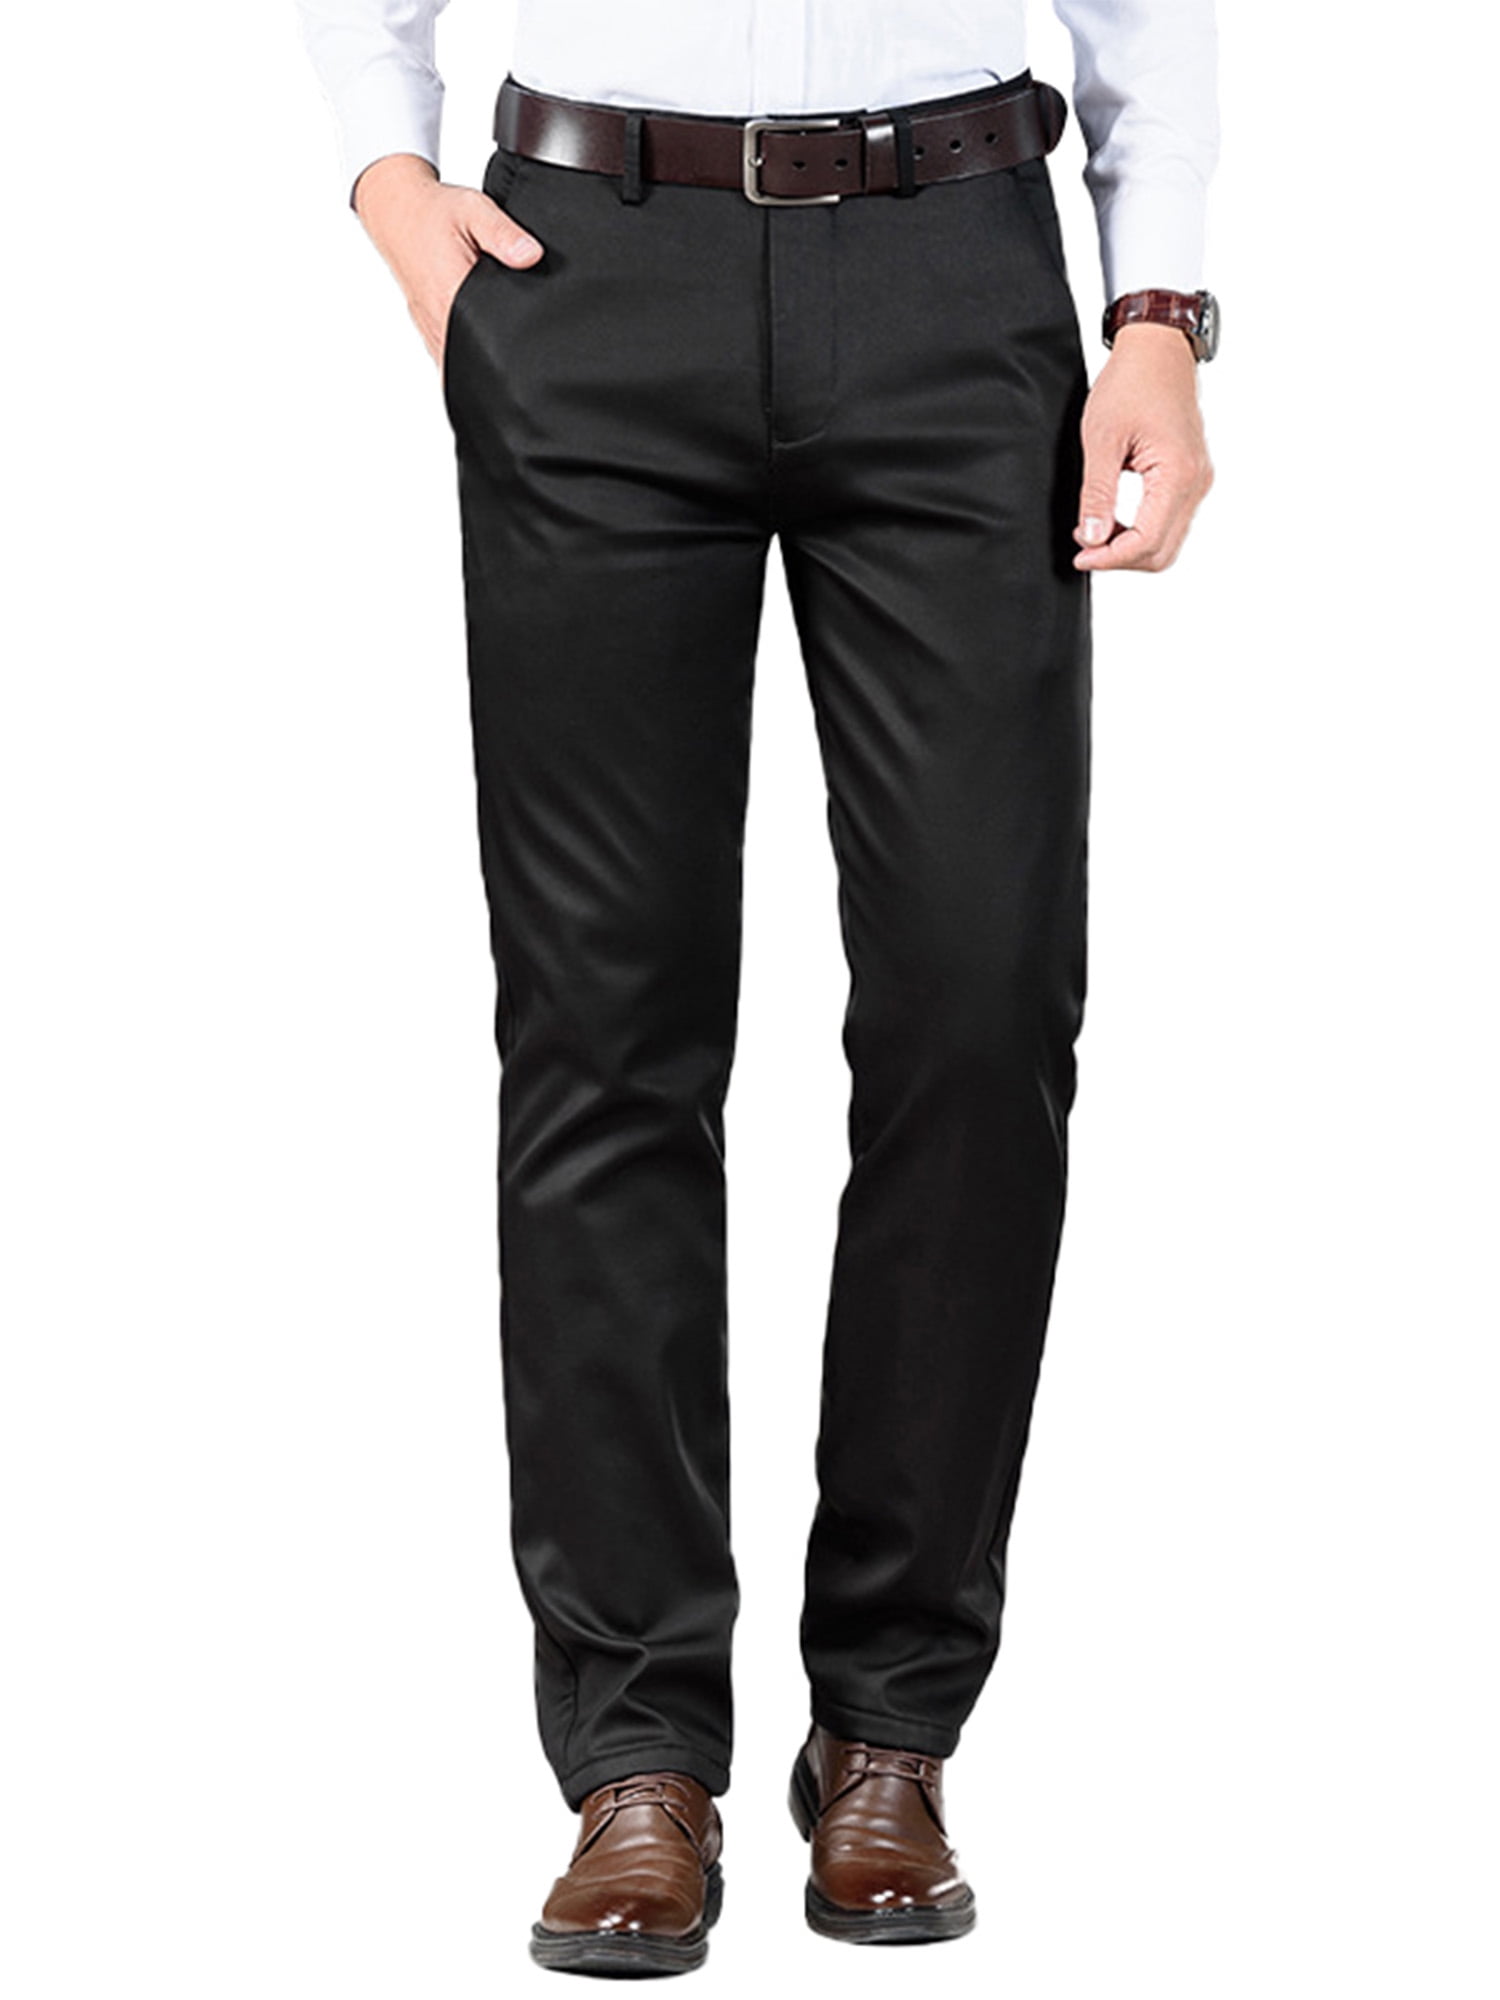 Black flat-front stretch Trousers